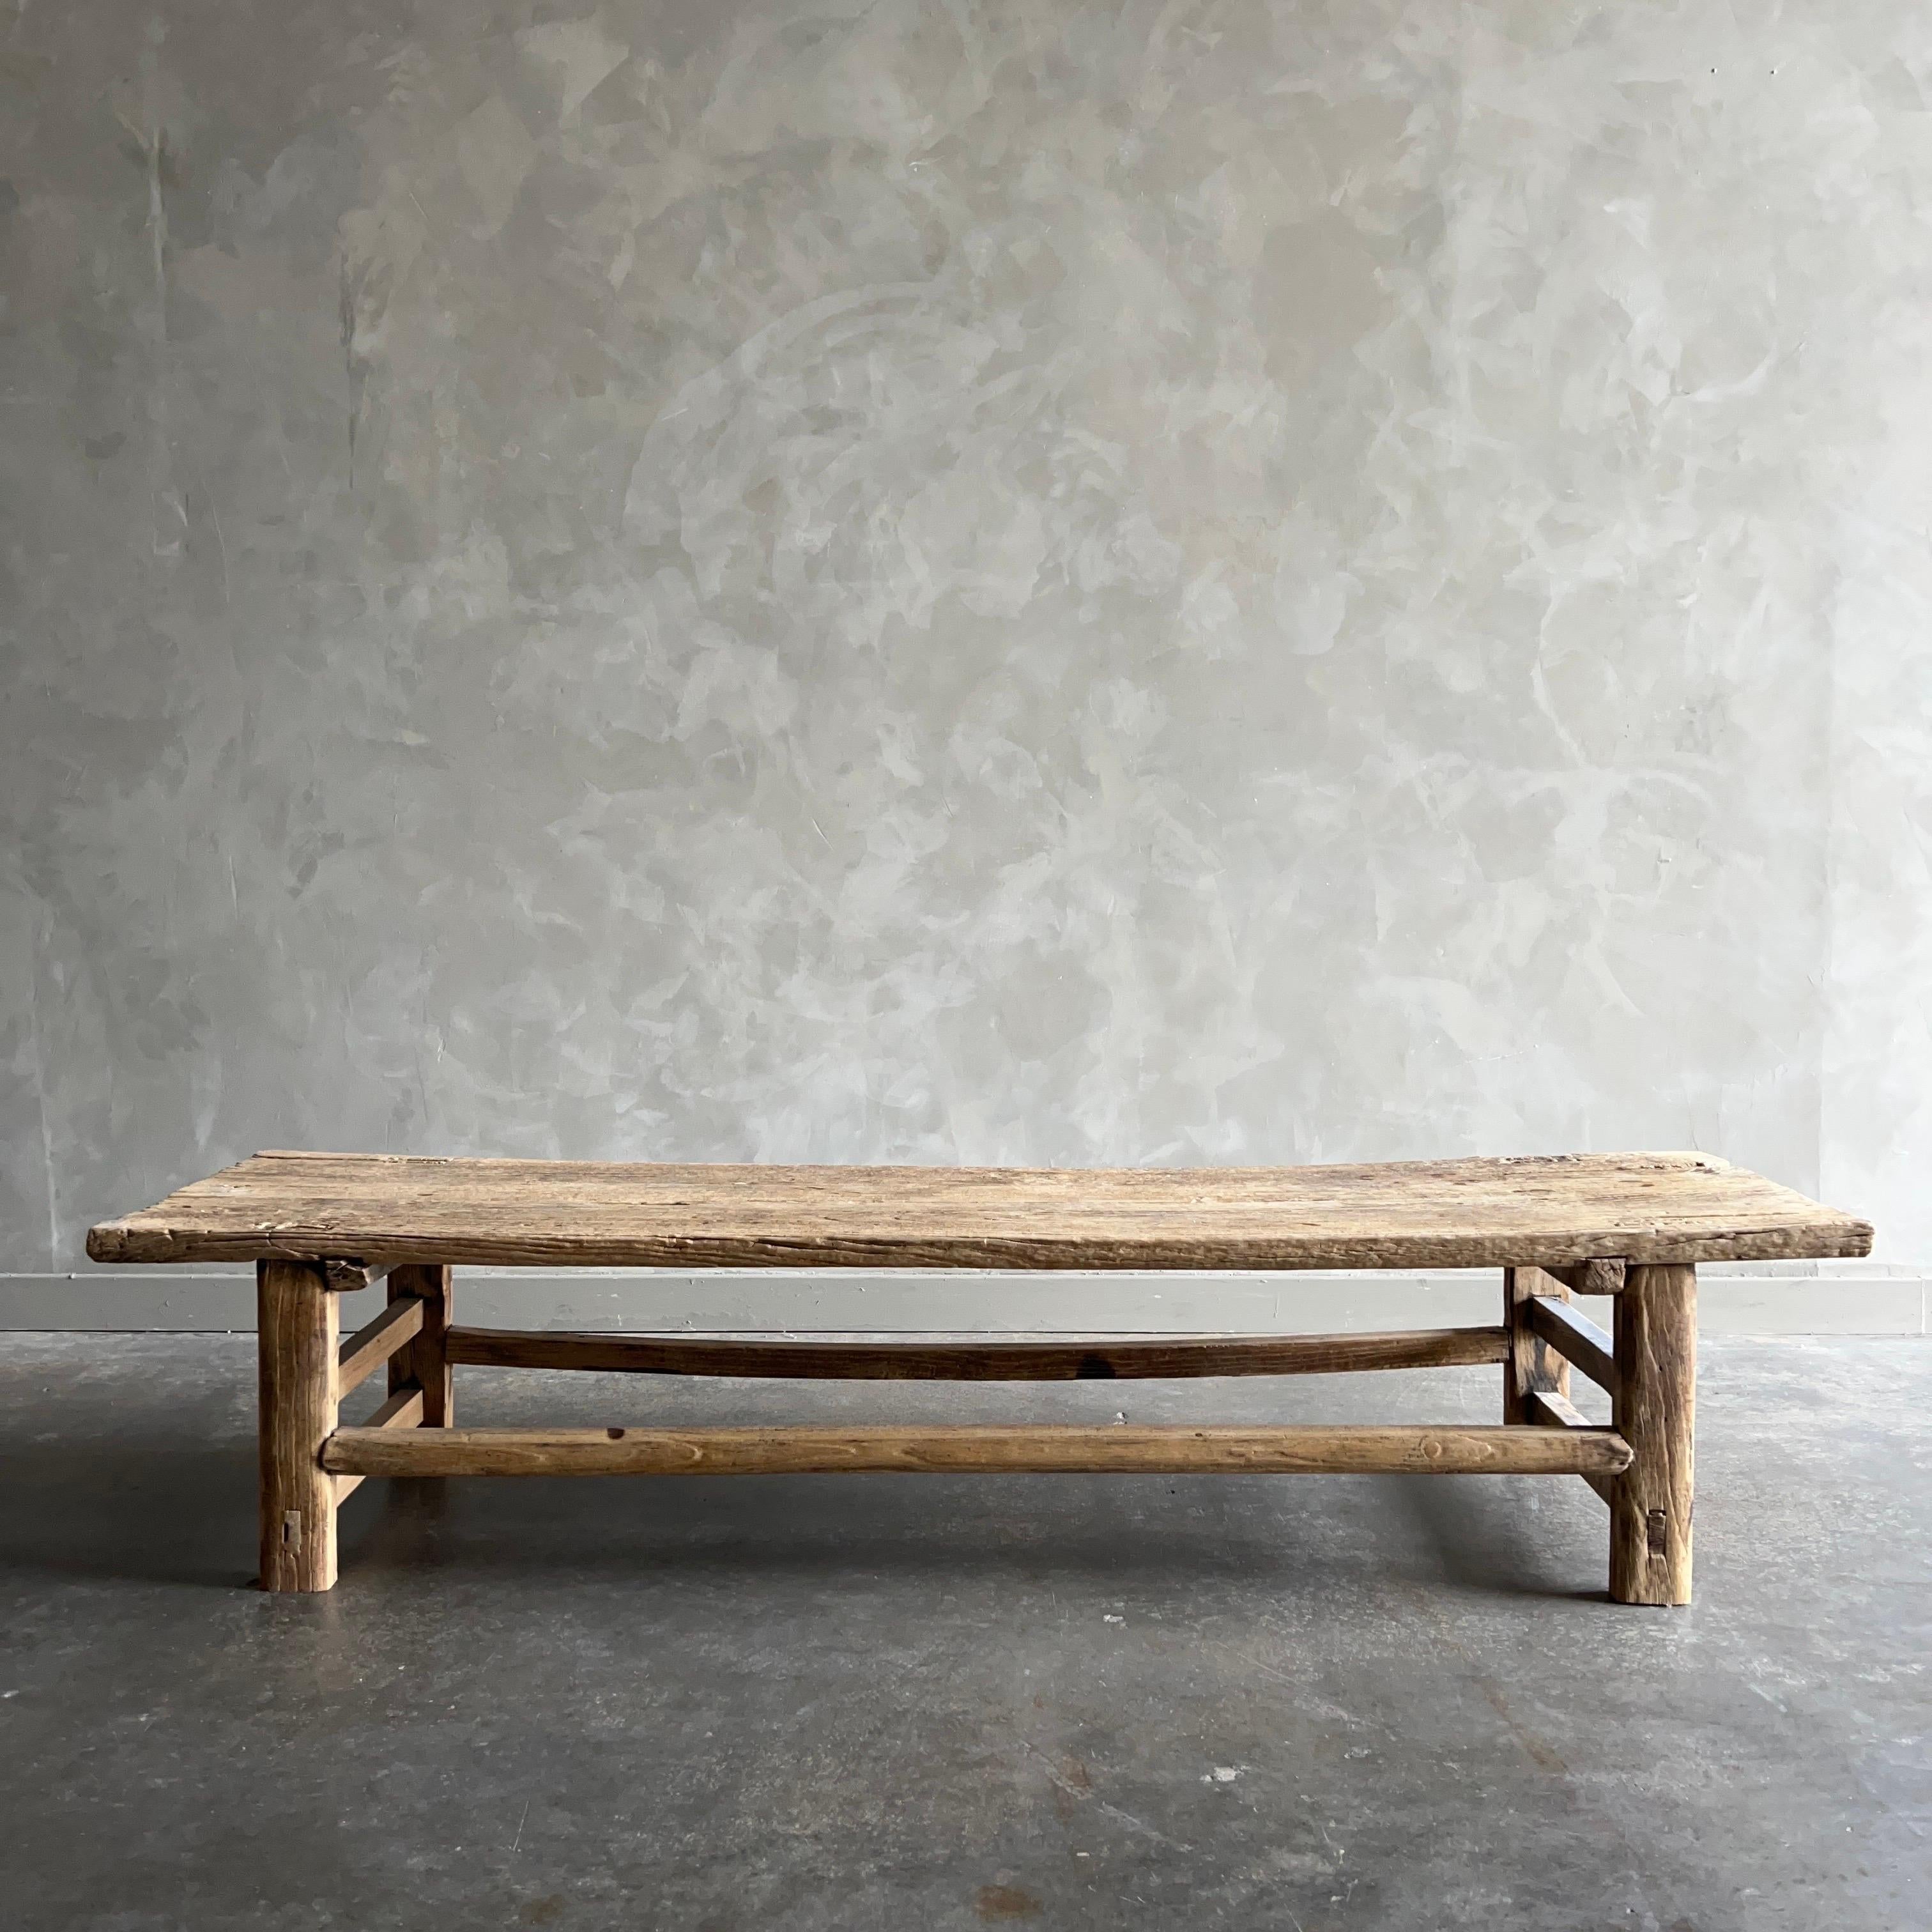 Vintage Elm wood bench or coffee table. Unique thick elm wood top, with natural age and patina. 
These are the real vintage antique elm wood pieces! Beautiful antique patina, with weathering and age, these are solid and sturdy ready for daily use,